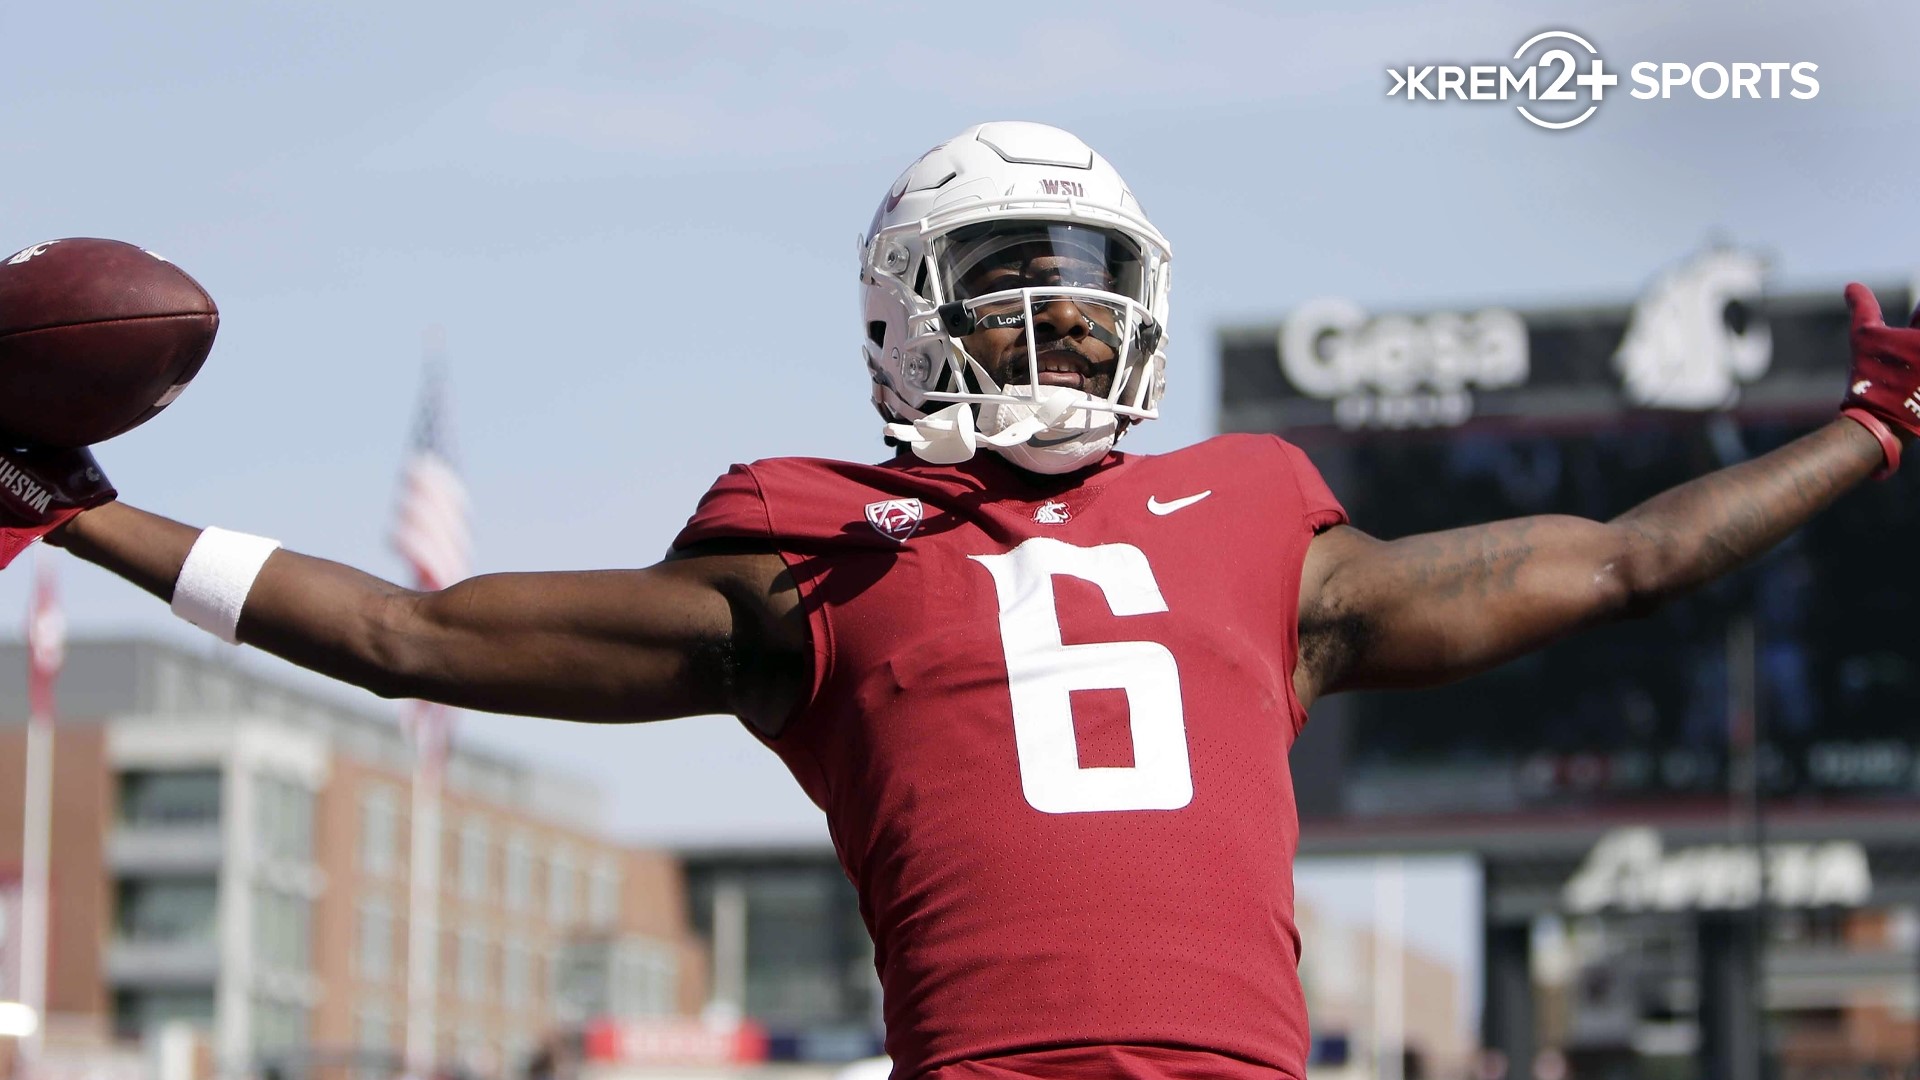 Washington State University Football looks to make a statement as it opens conference play against Oregon. The Cougs have started the season 3-0.